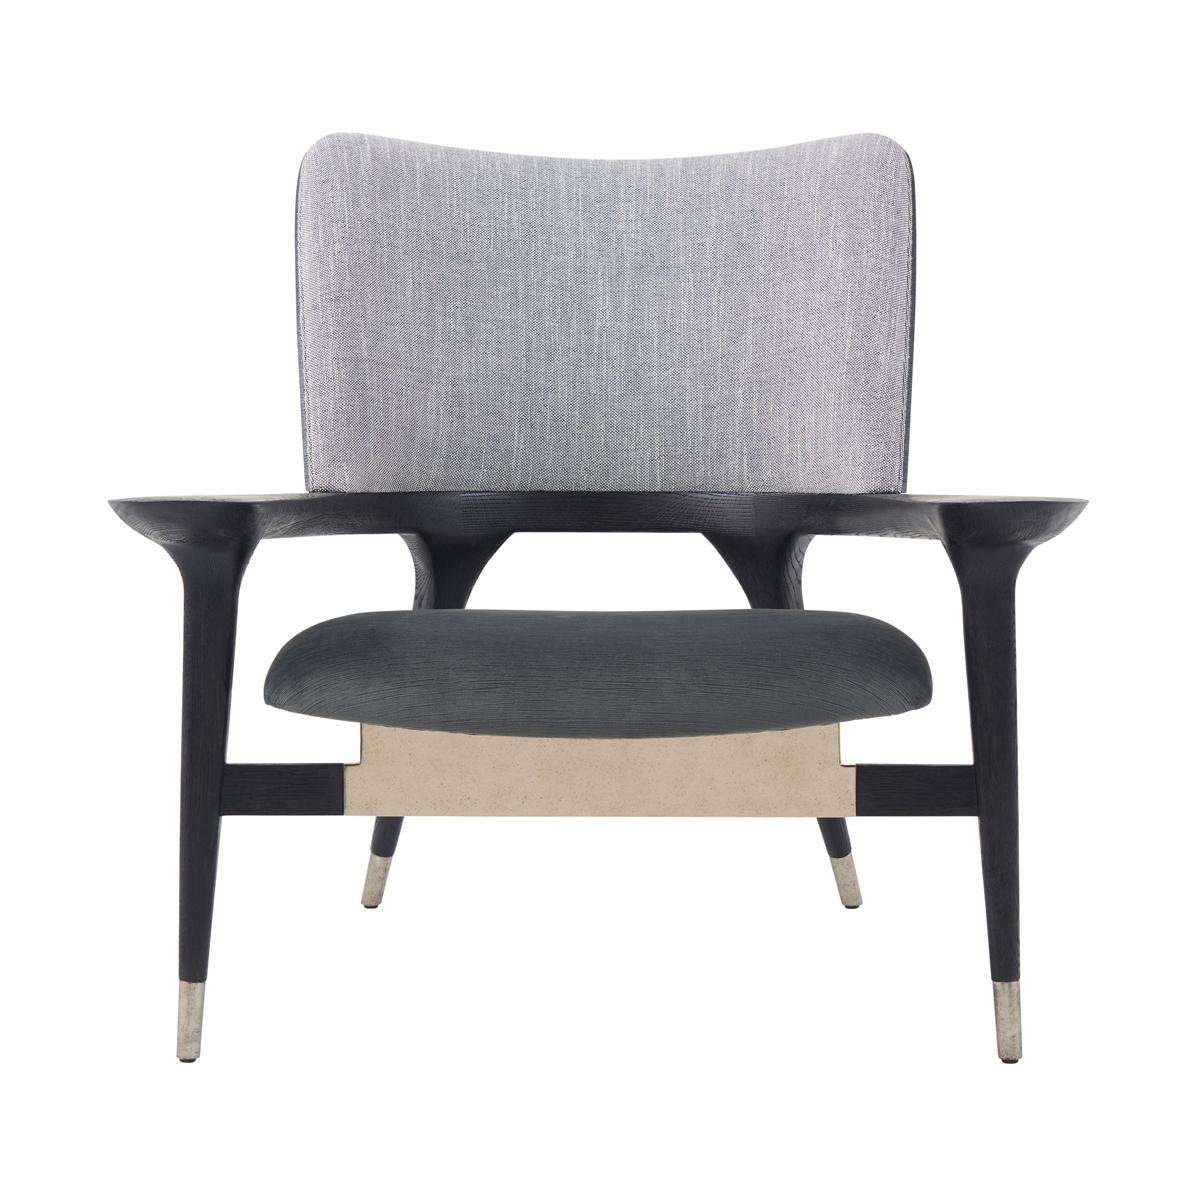 With dark charcoal finish on the comfortable curved barrel backrest. Upholstered cushions with brass details.

An improvement on the stylish Mod design with shapely legs that taper beneath the elegant frame and a floating seat. Gracefully curving